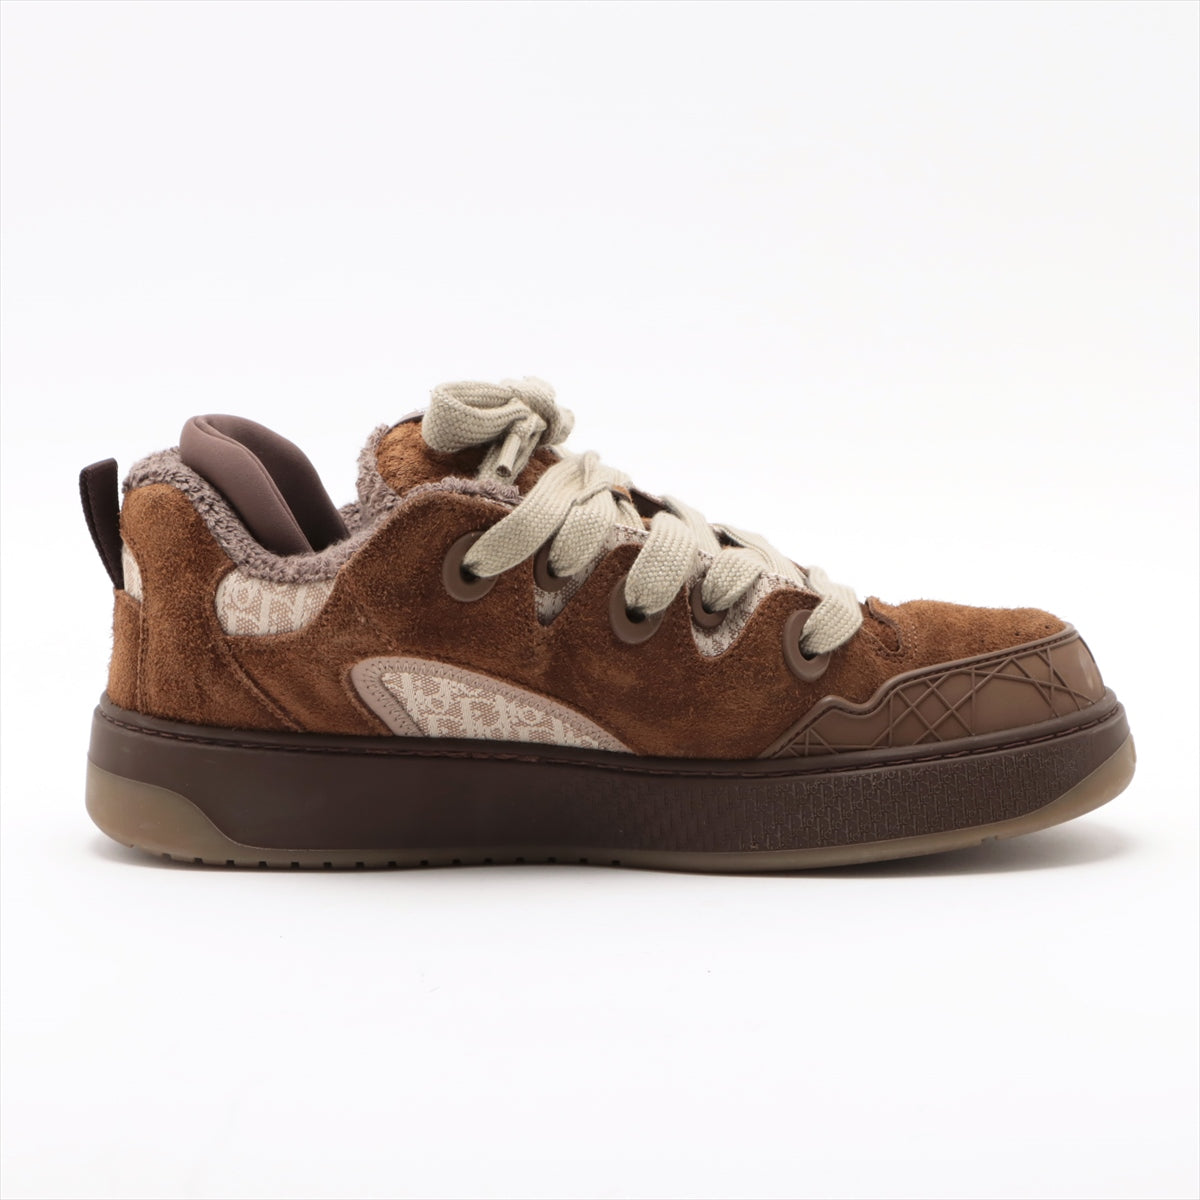 Dior x ERL Suede Sneakers 41 Men's Brown LS1122 with bag